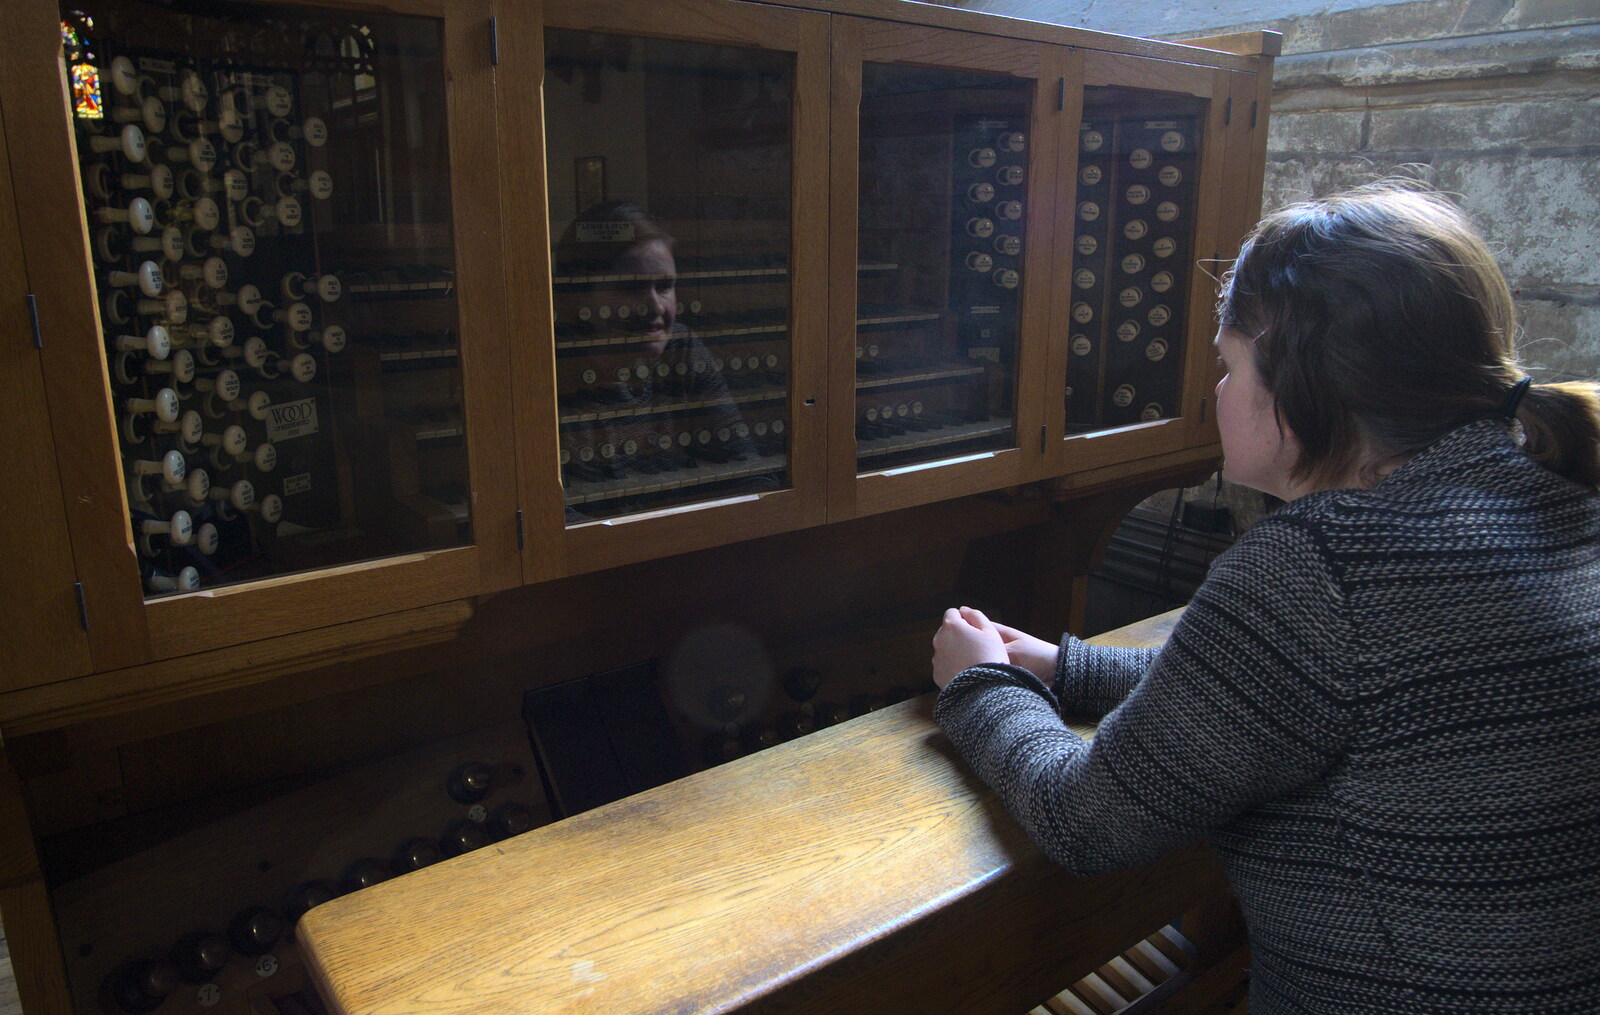 Isobel gets close up with the church organ from Chesterfield and the Twisty Spire, Derbyshire - 19th April 2013